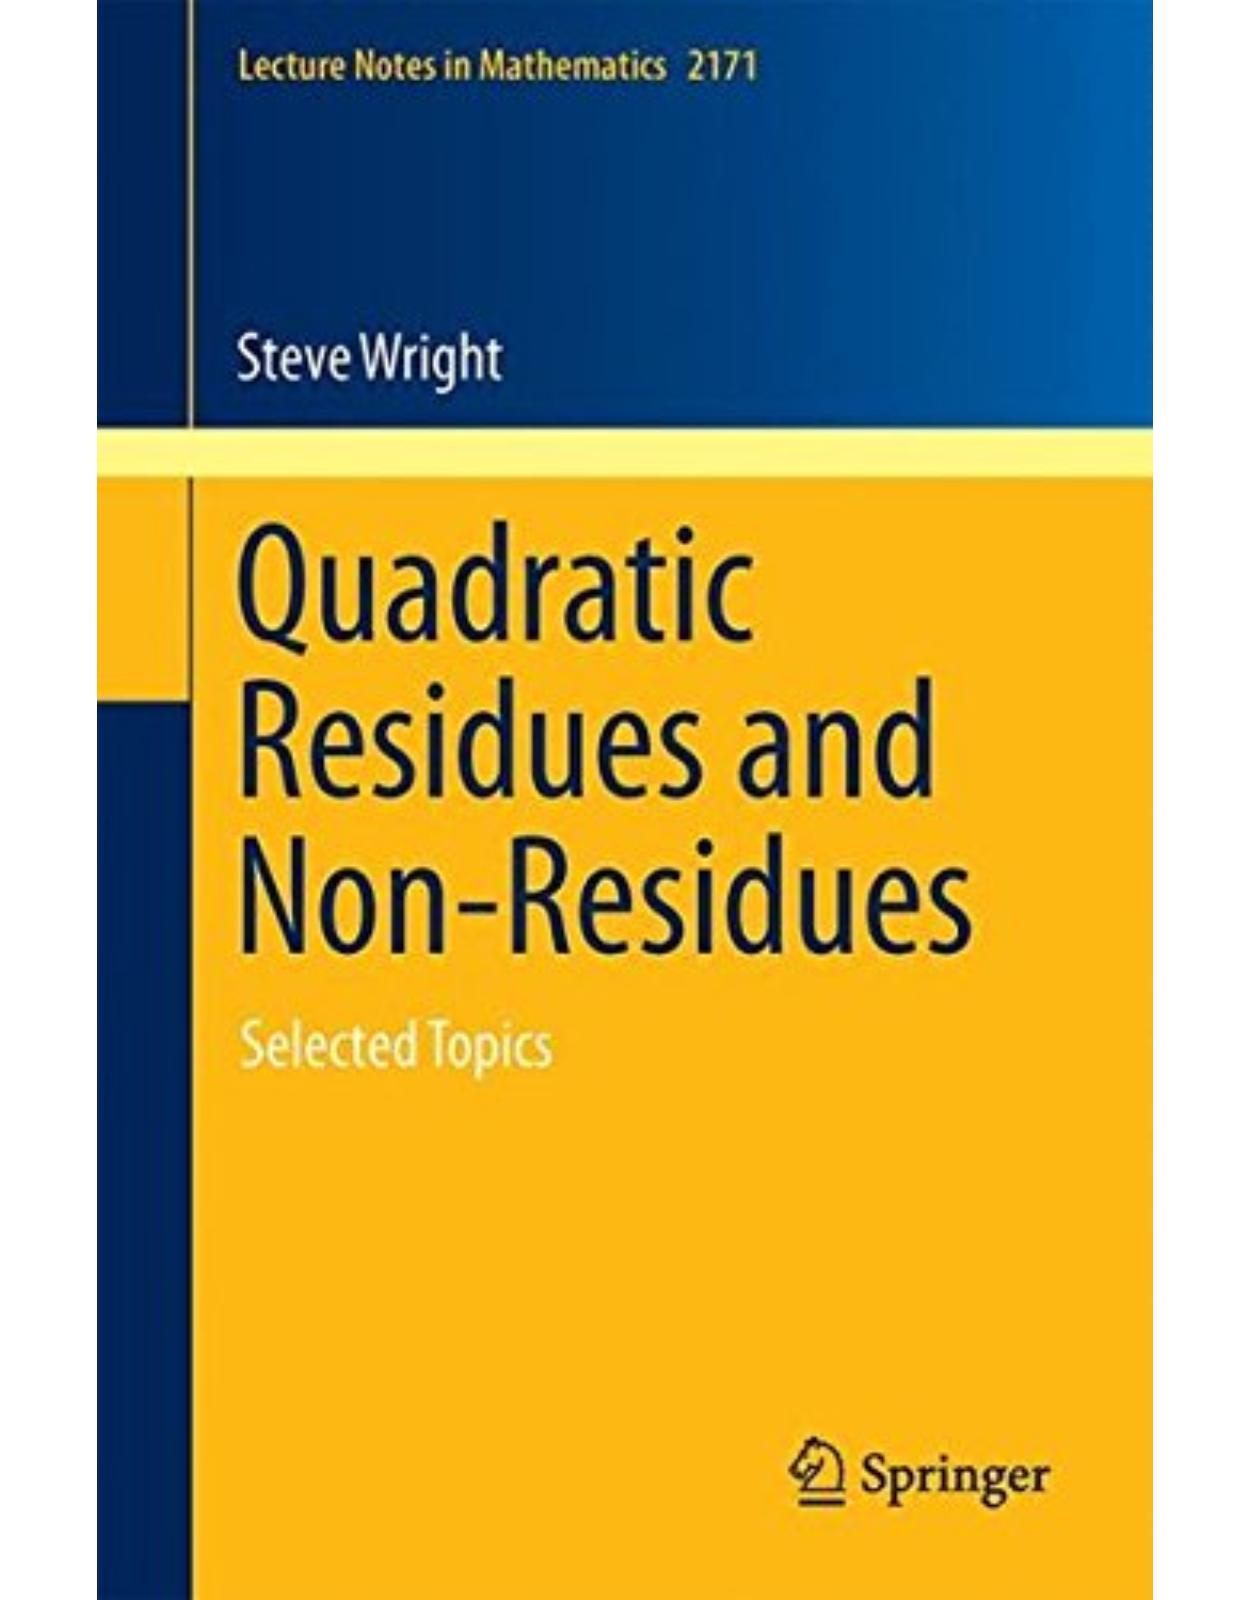 Quadratic Residues and Non-Residues